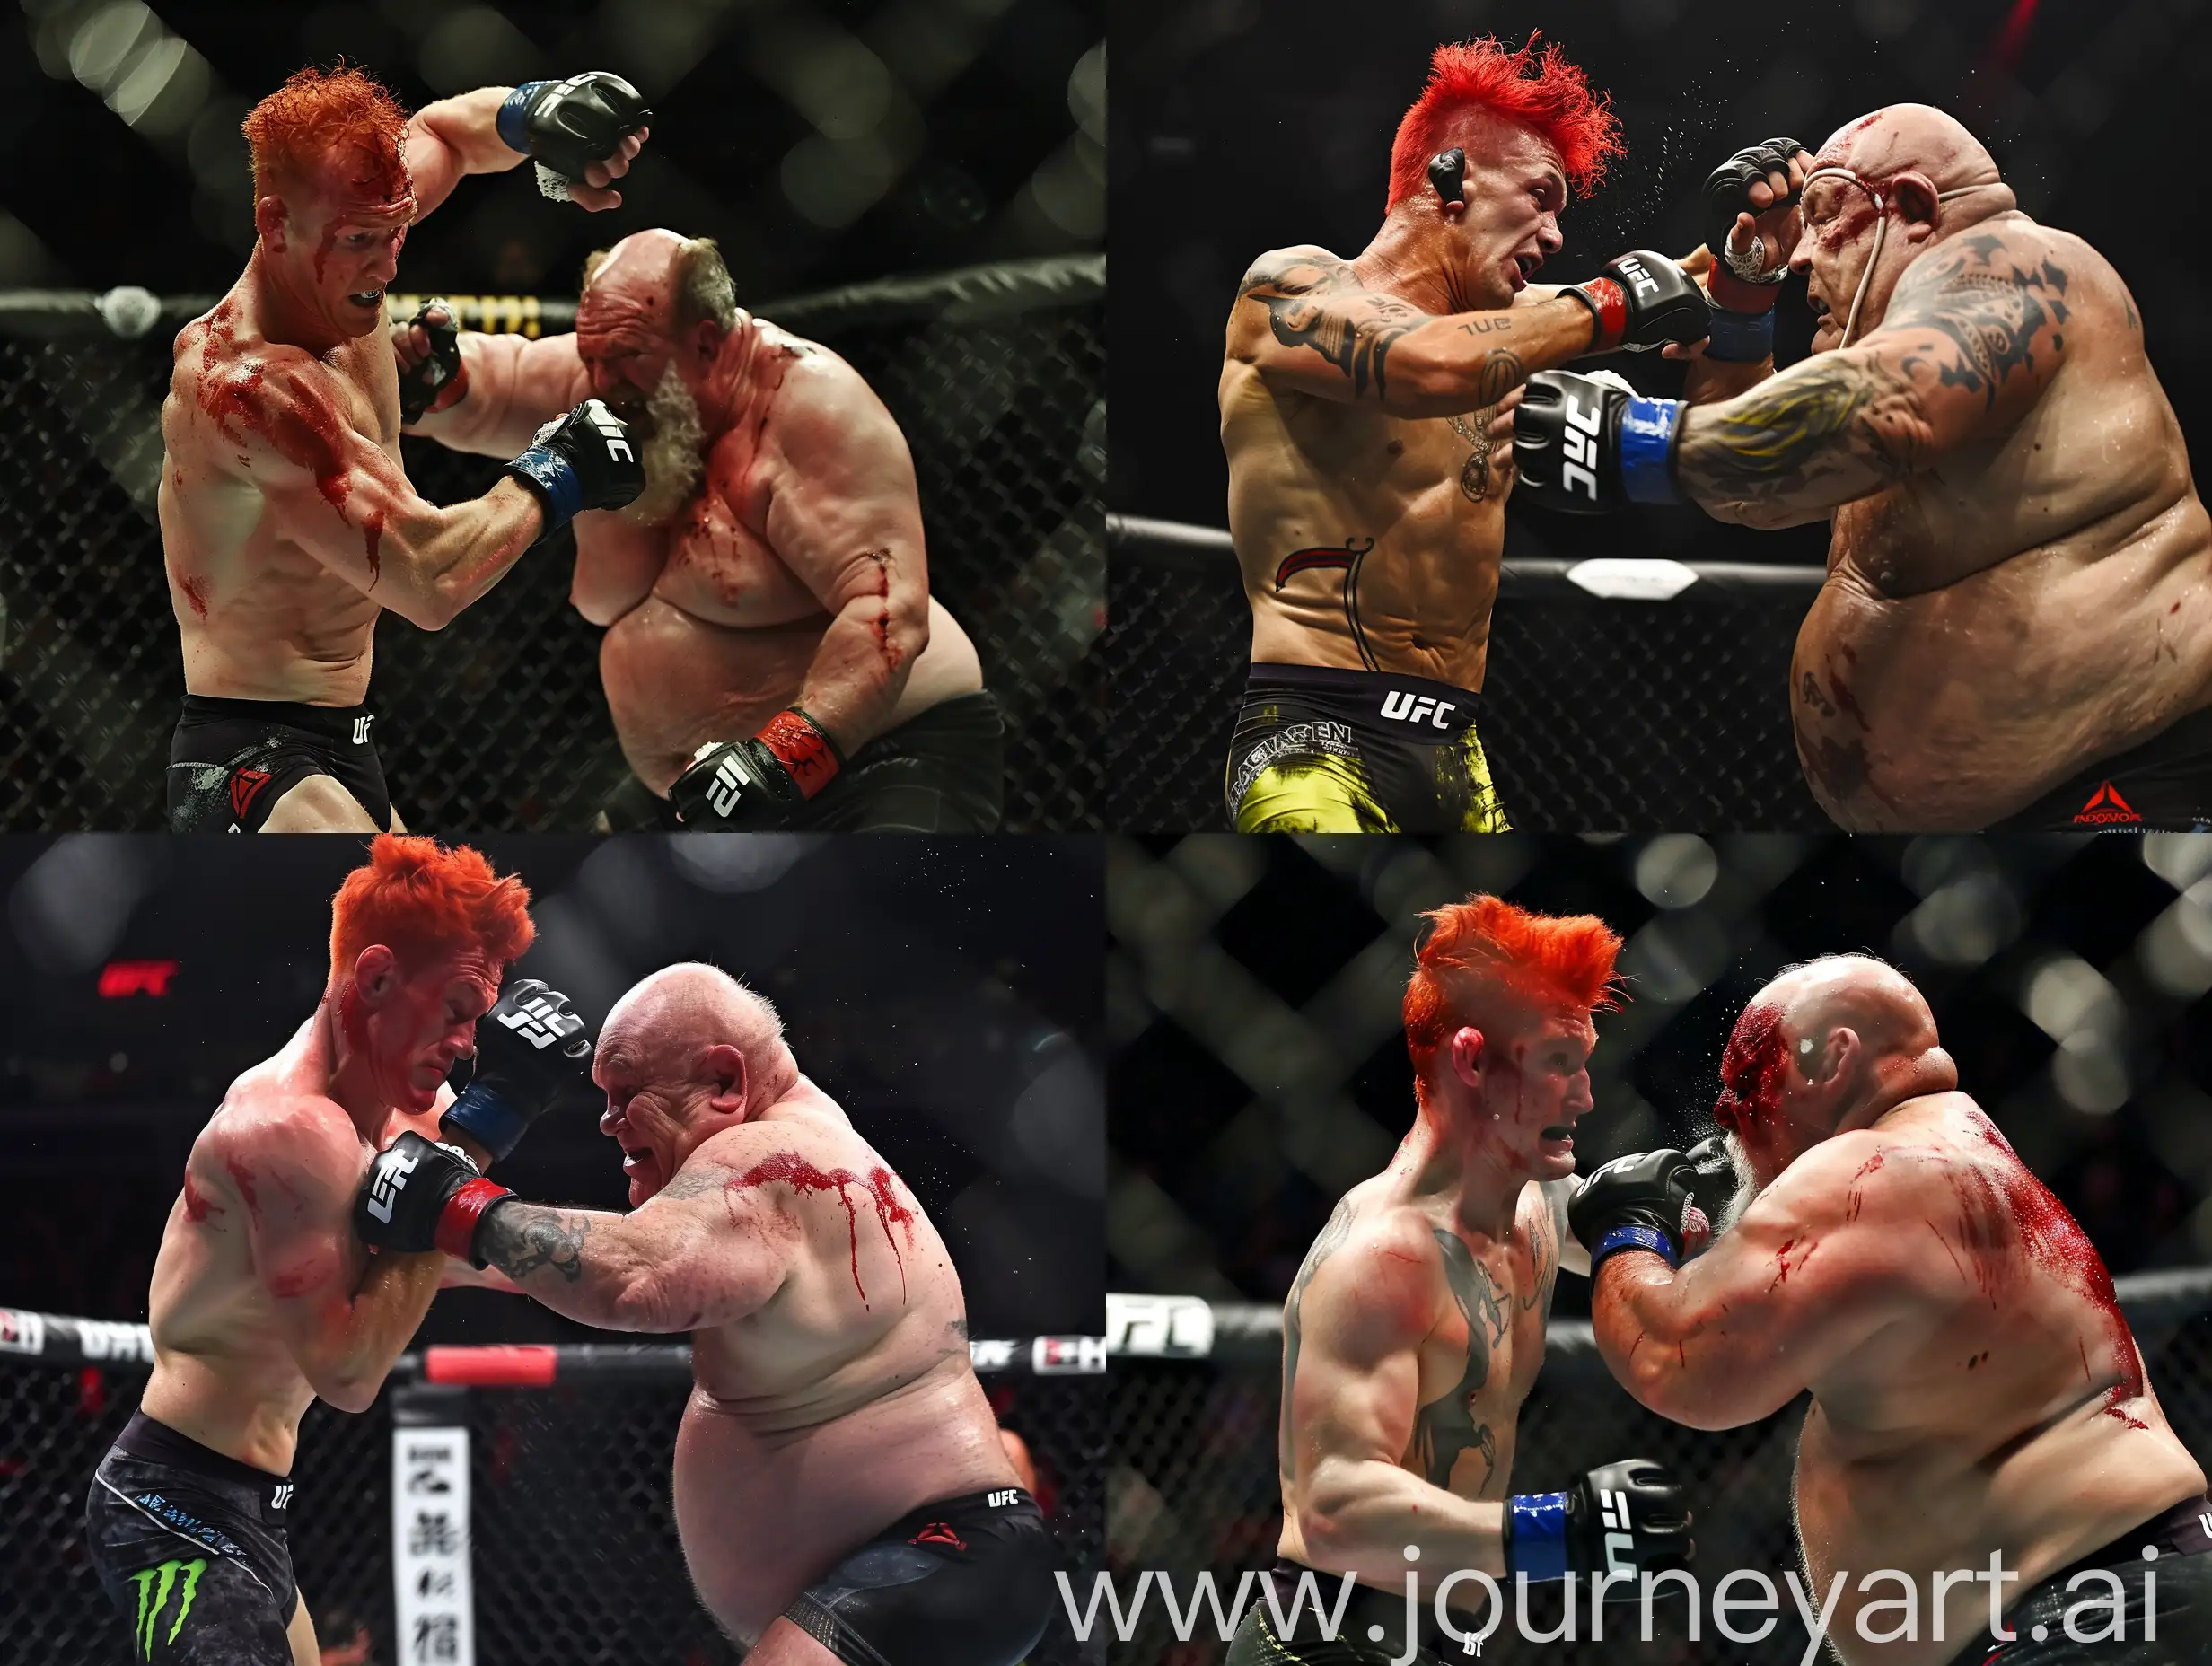 Intense-UFC-Battle-RedHaired-Fighter-Takes-on-Experienced-Heavyweight